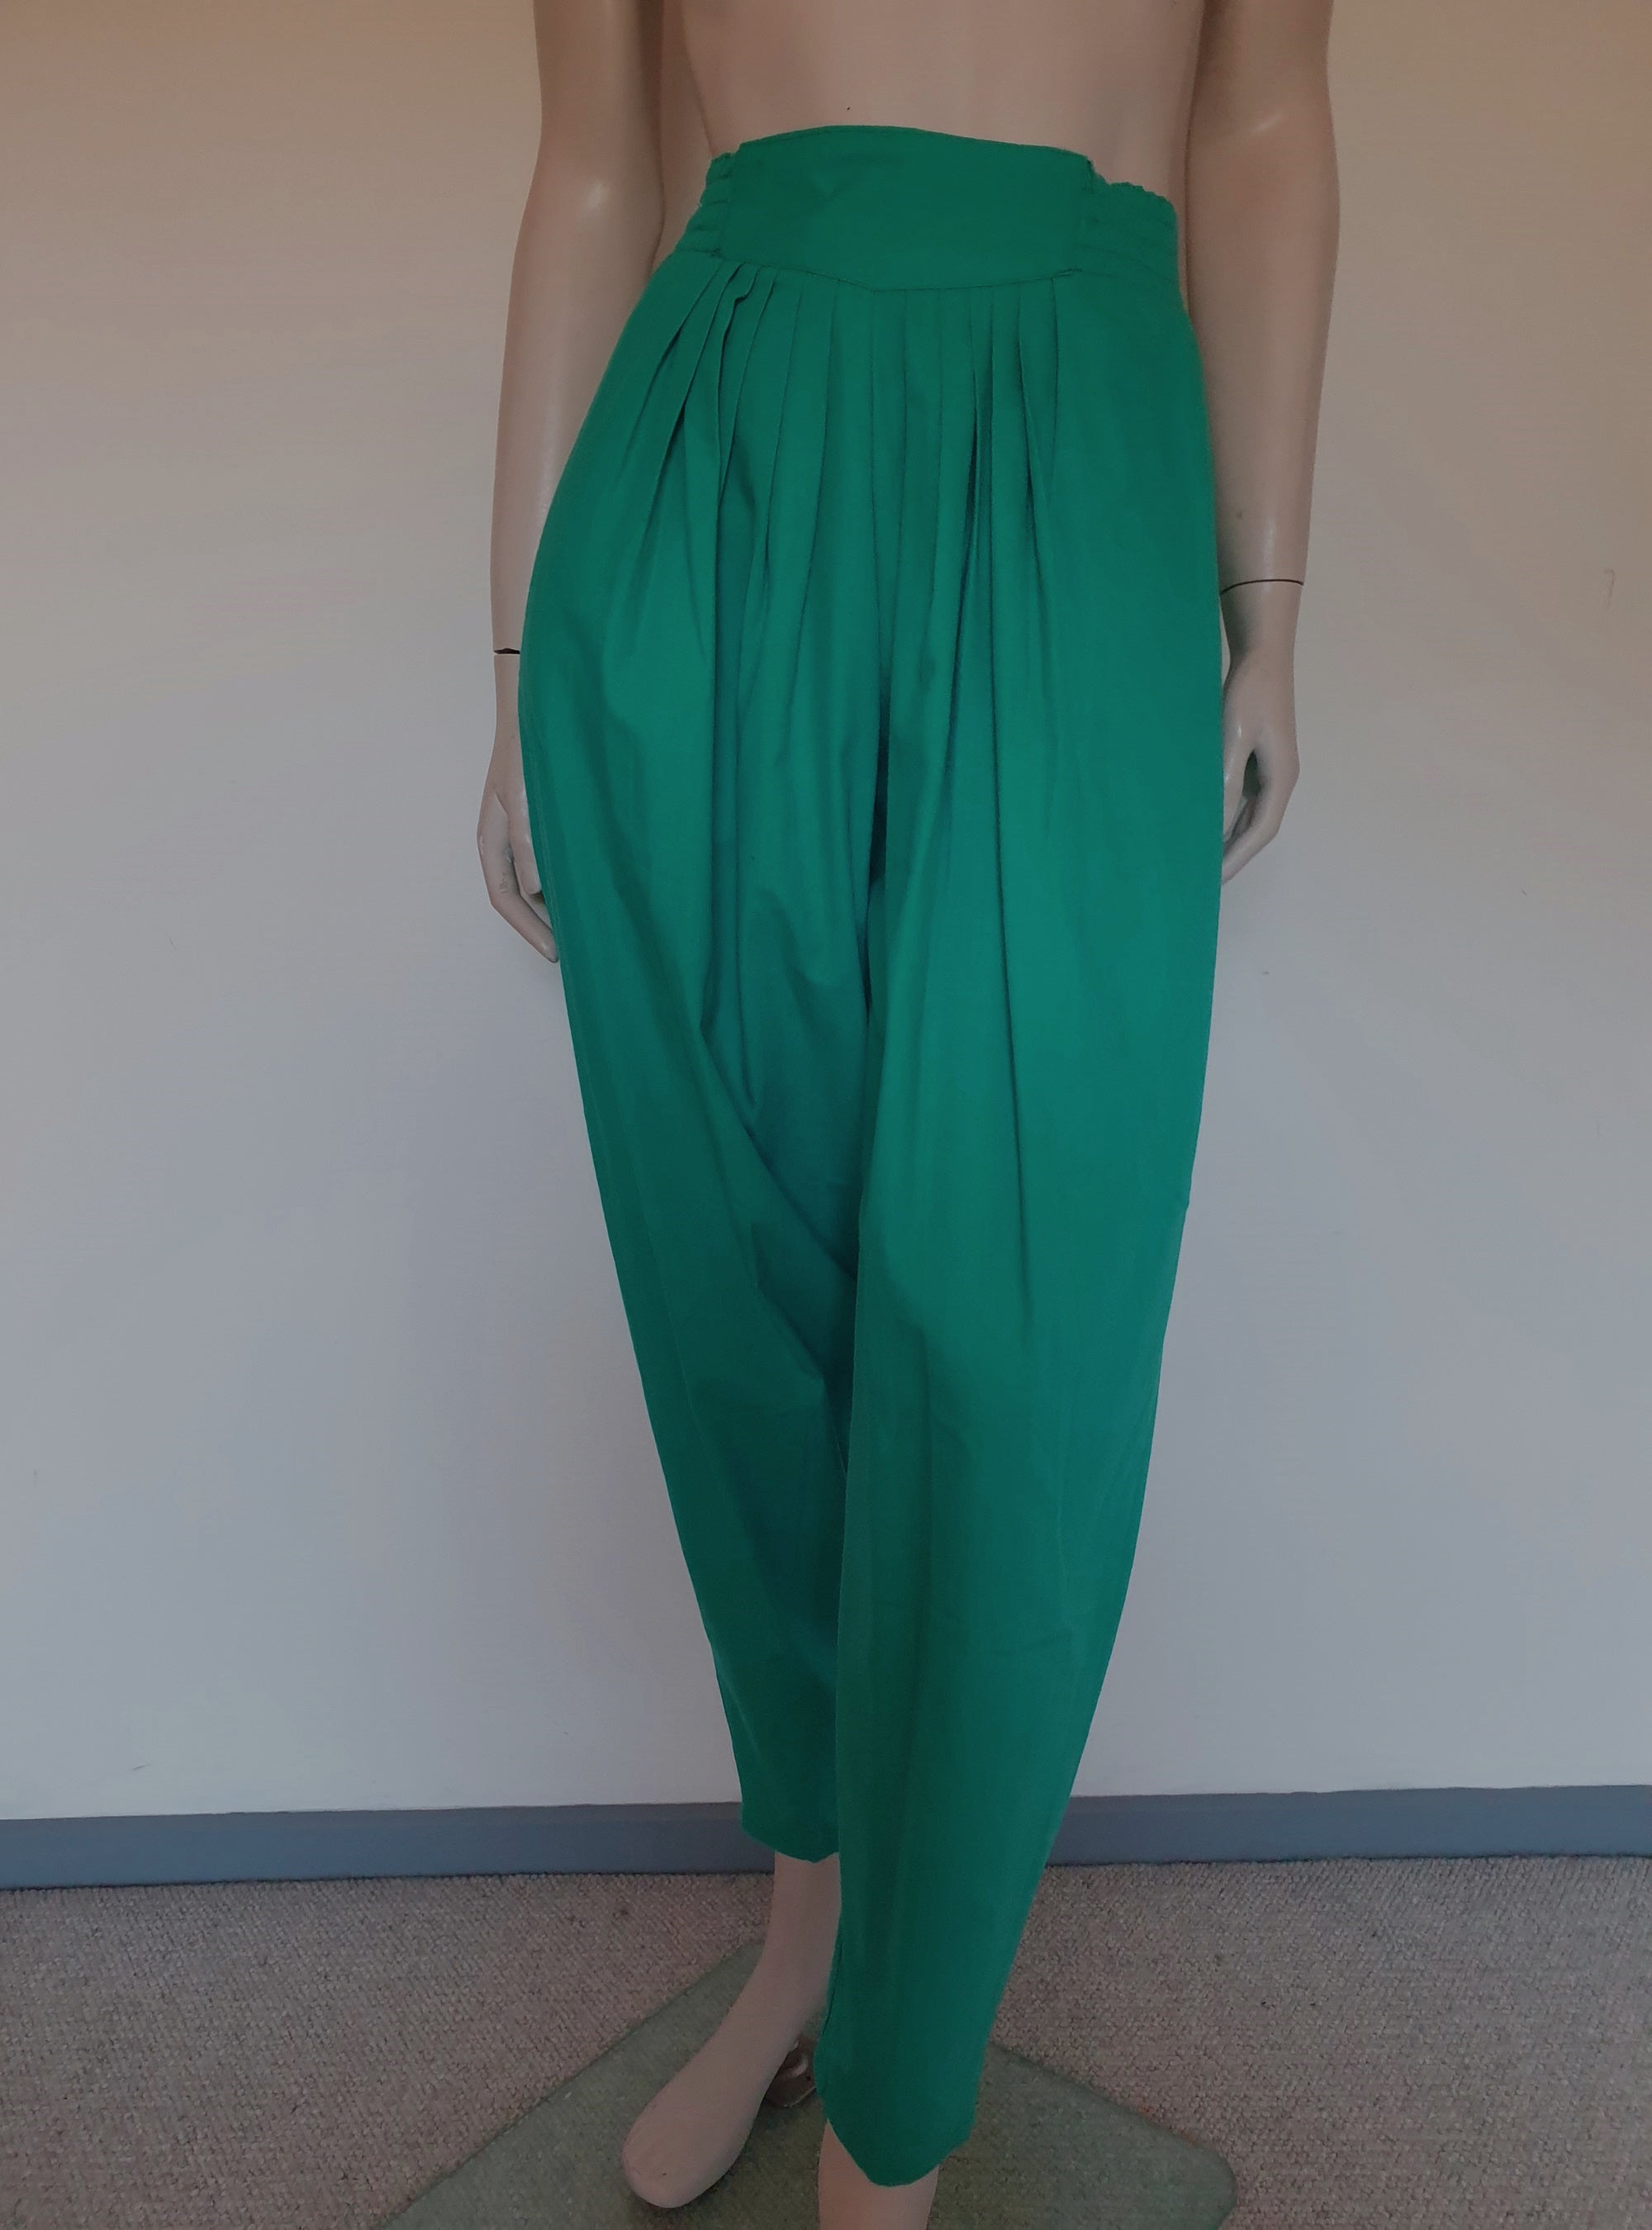 vintage 1980s baggy pants with tapered legs in jade green. New old stock.